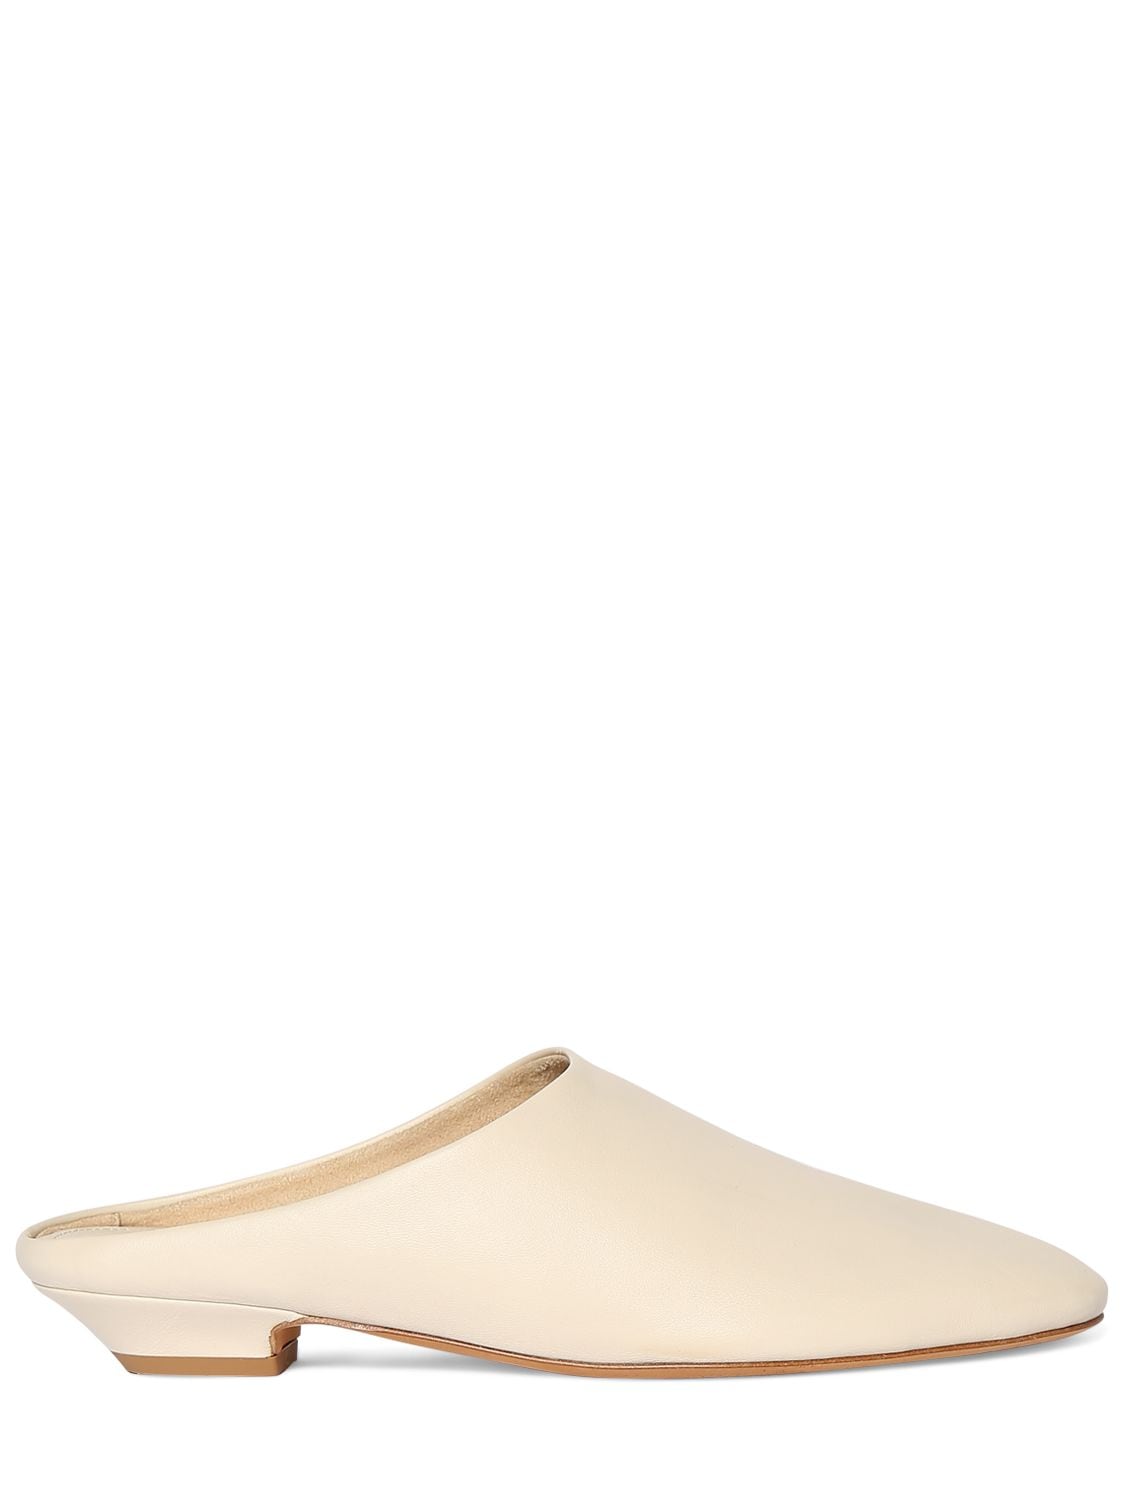 Khaite Otto Leather Slippers In Off White